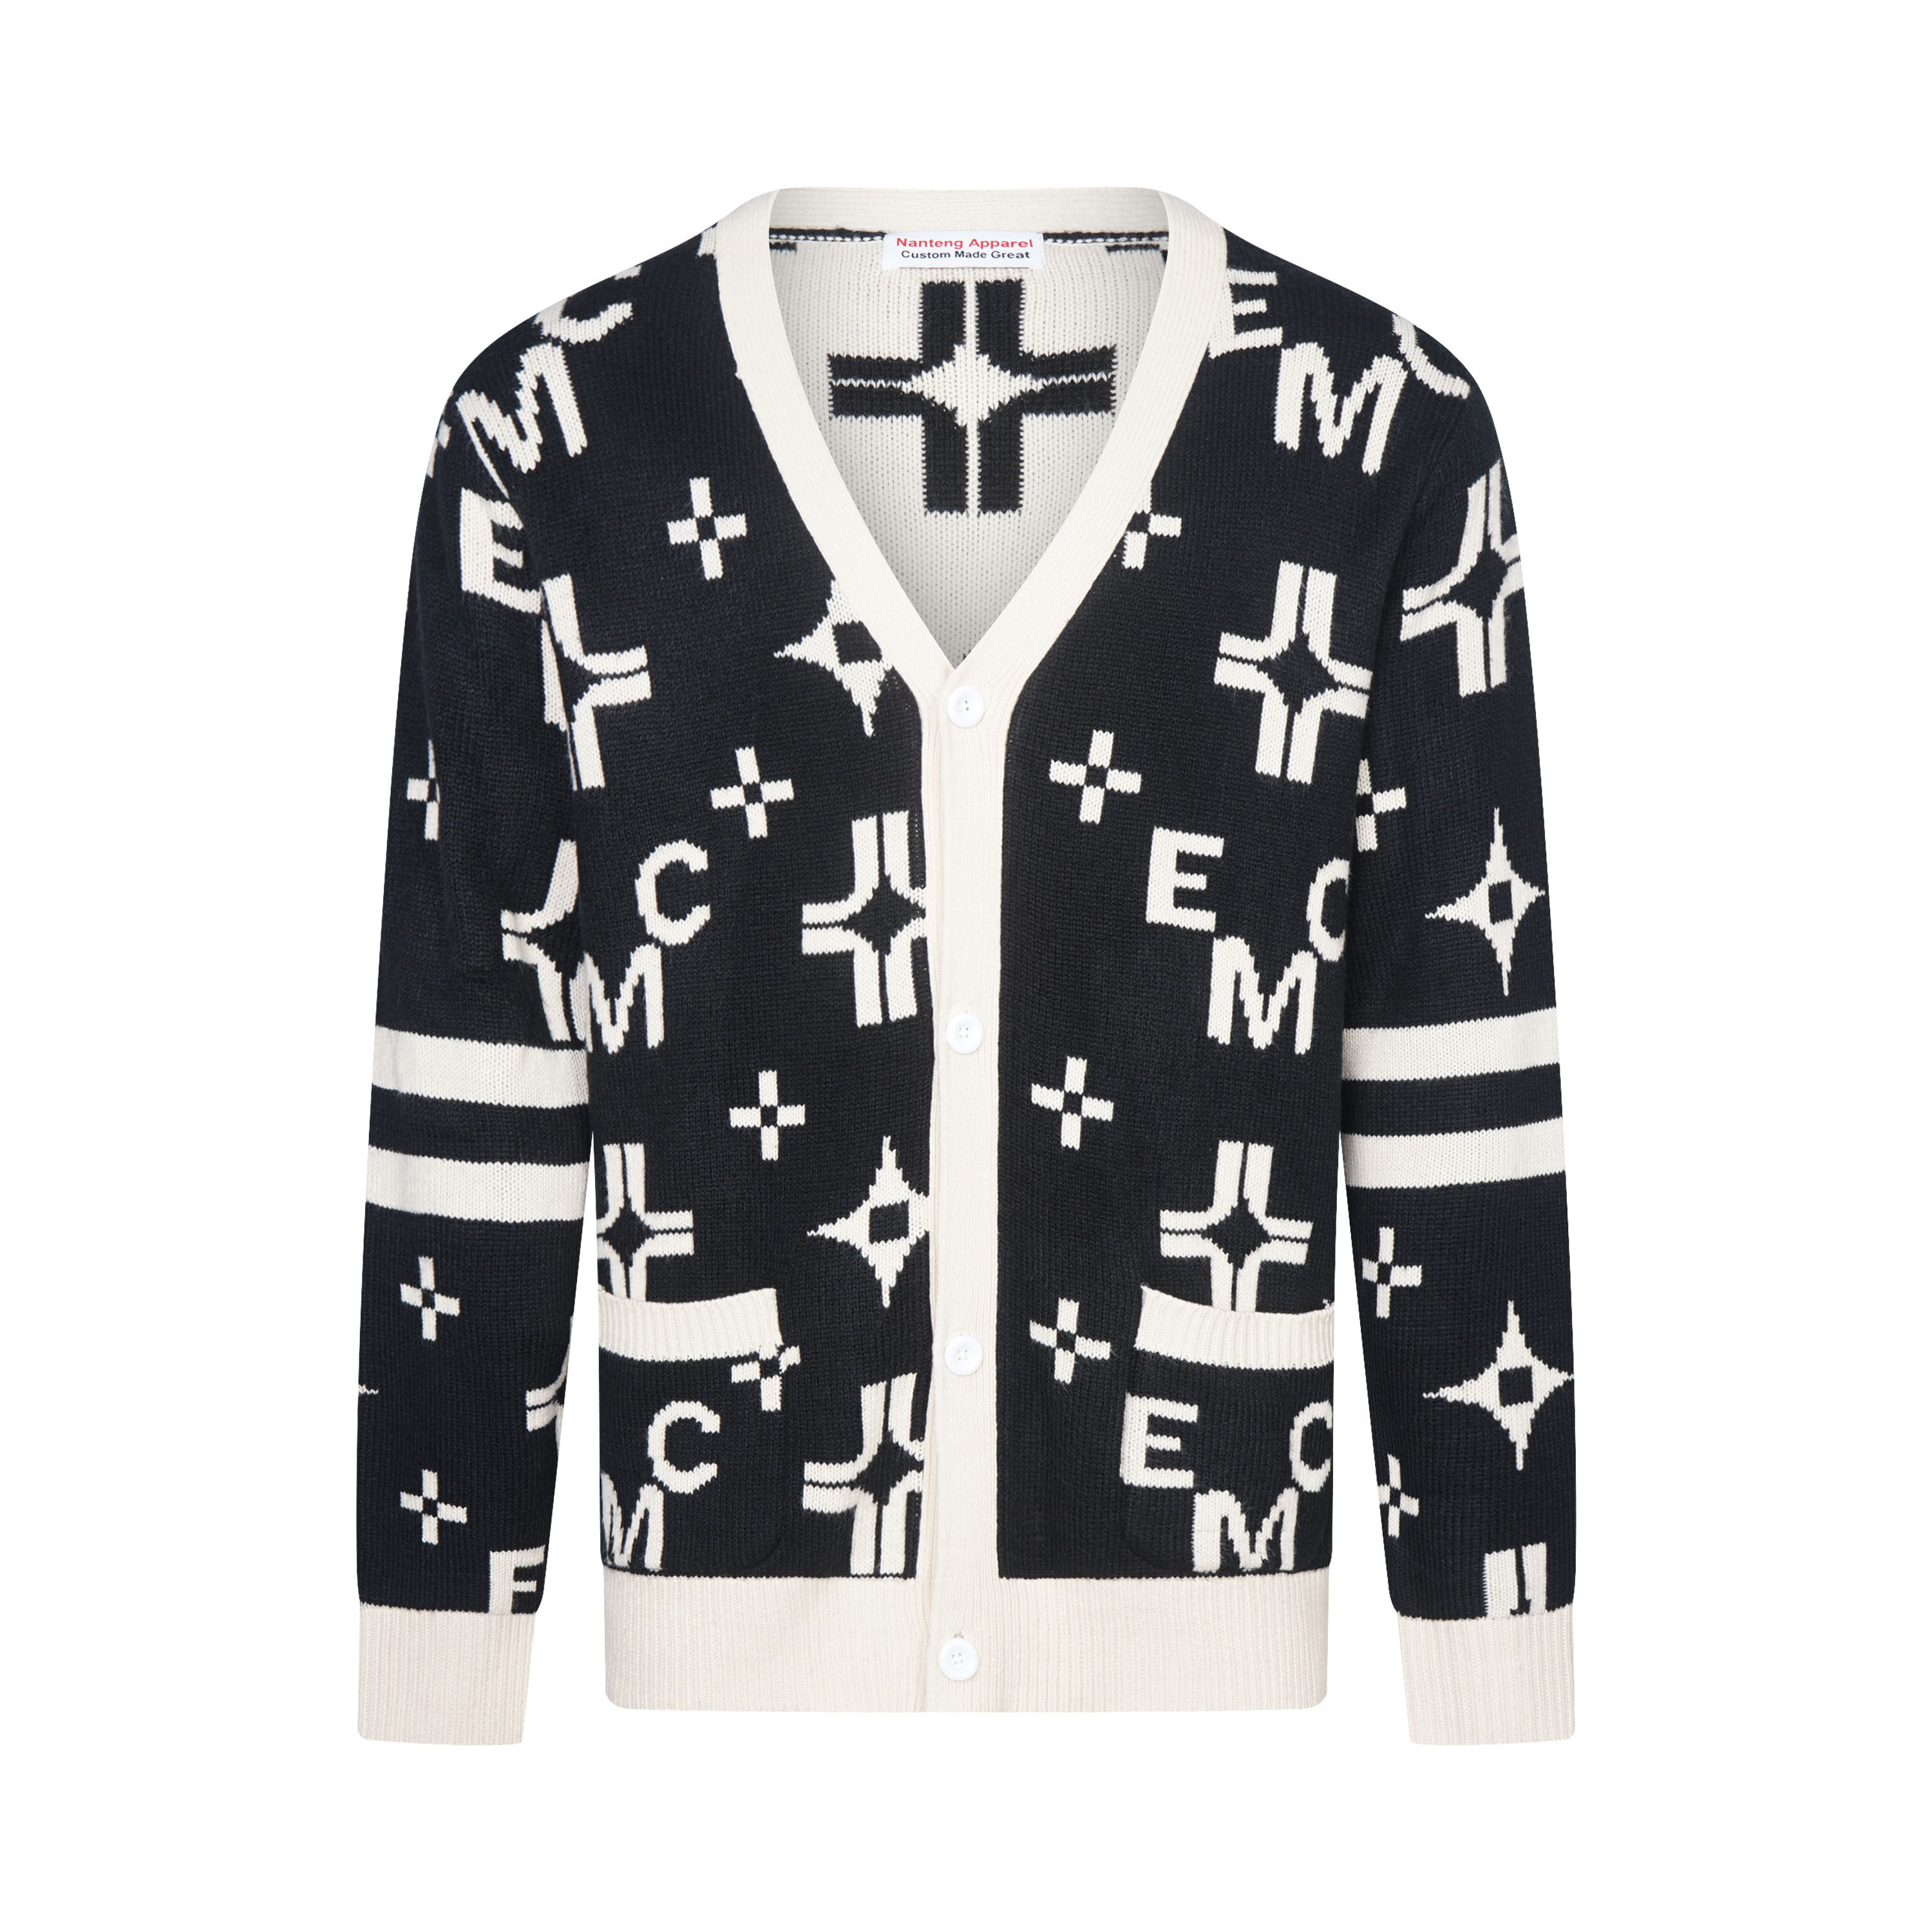 Custom Winter Western Rib Knit With Button Letter Logo Contrast Placket Men Cardigan Sweater